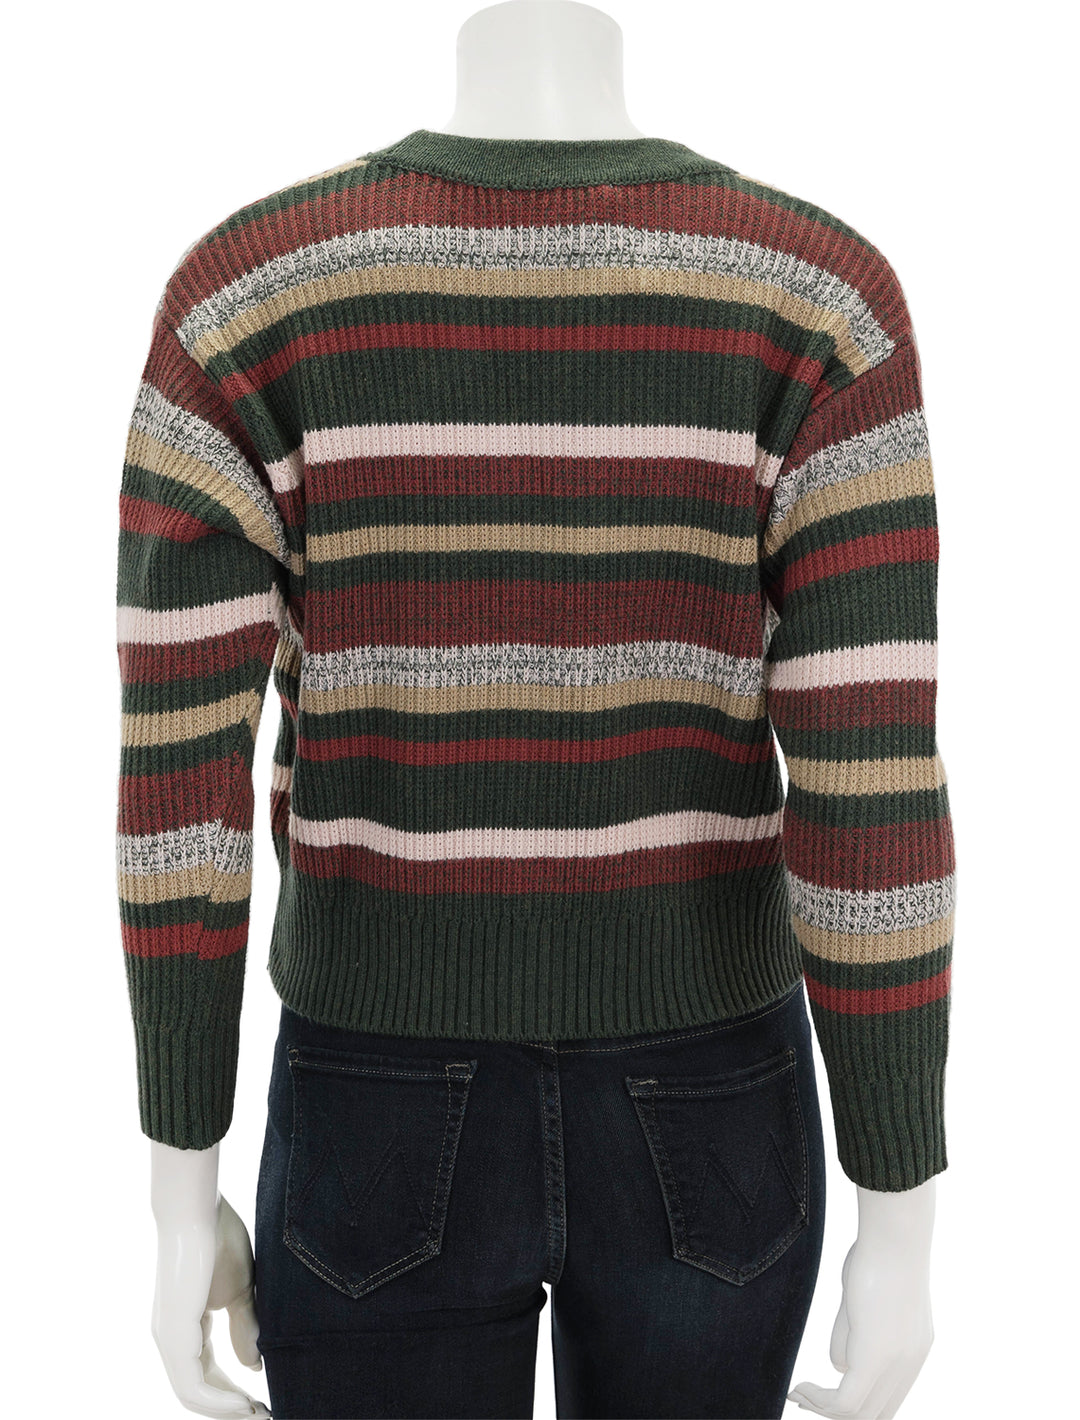 Back view of Marine Layer's robin striped crop cardigan.